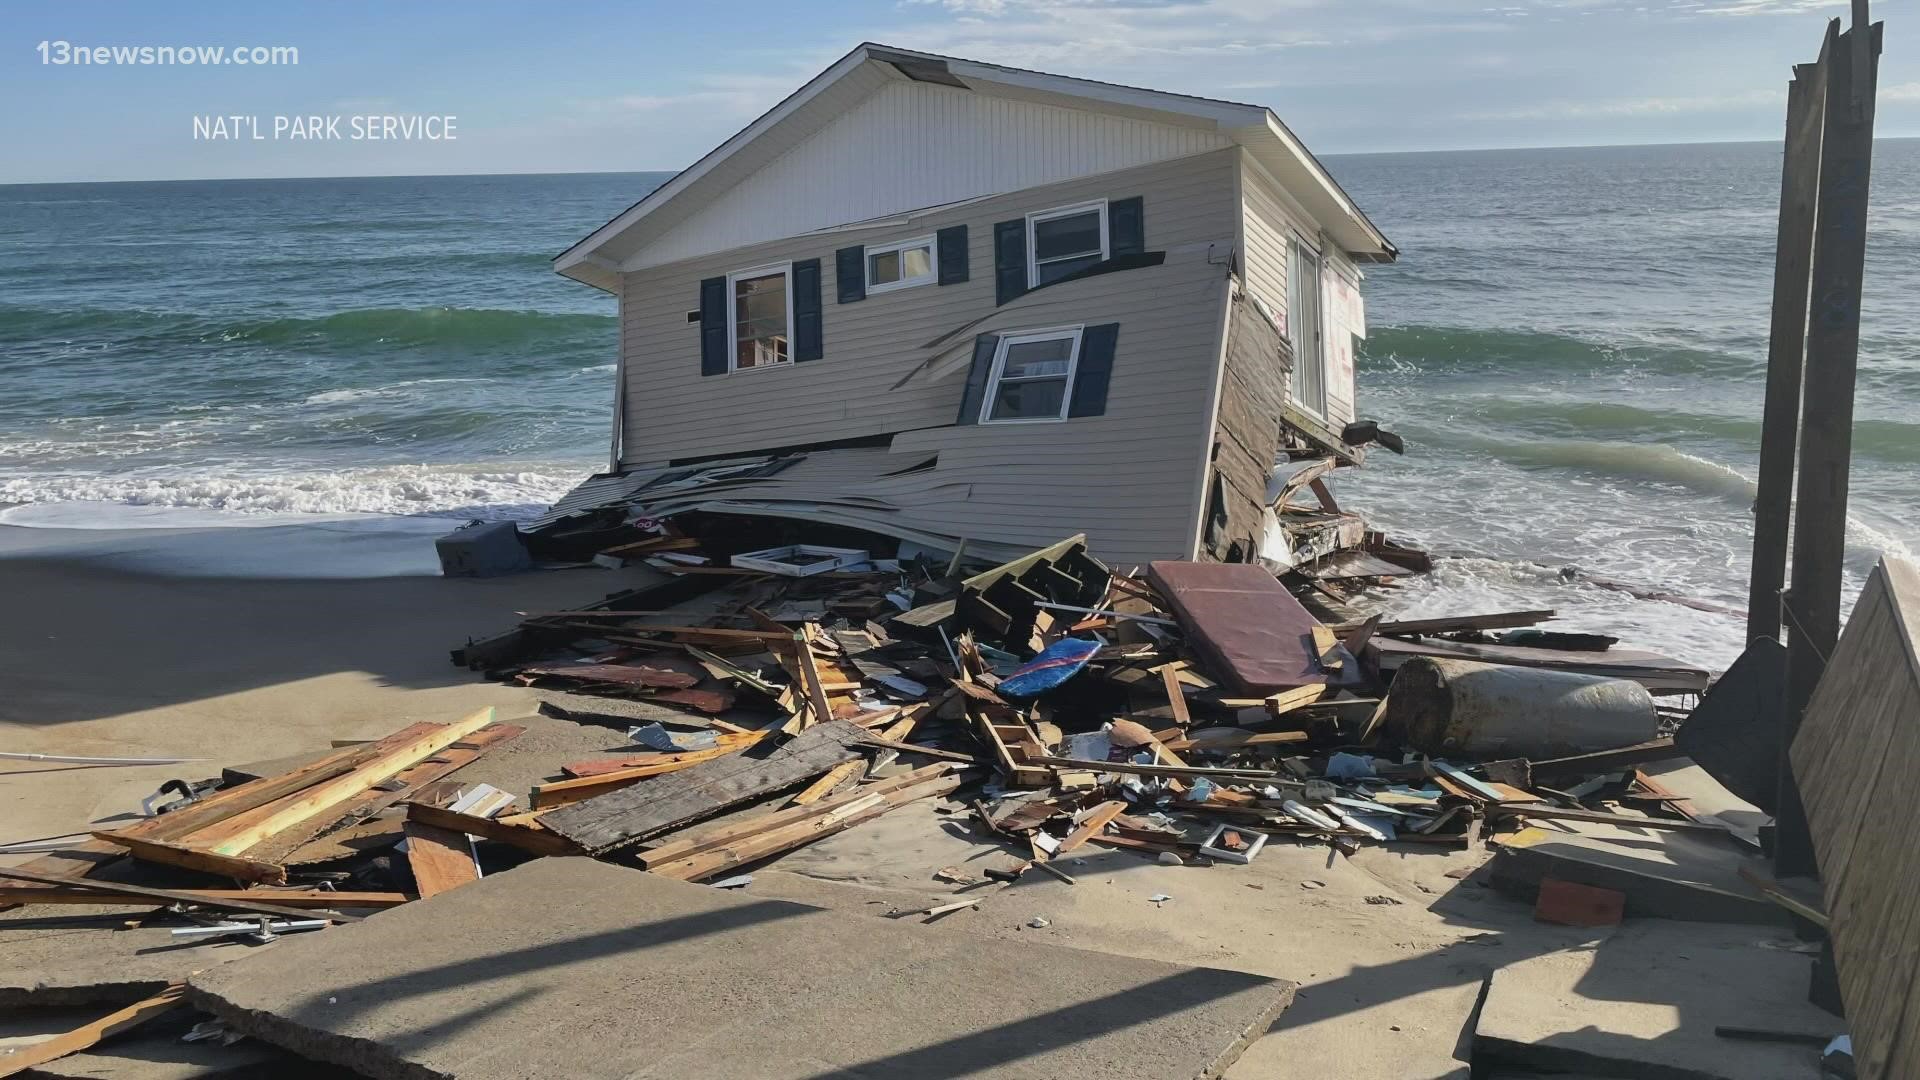 Community leaders on the Outer Banks are looking for input on how to keep oceanfront houses from collapsing.